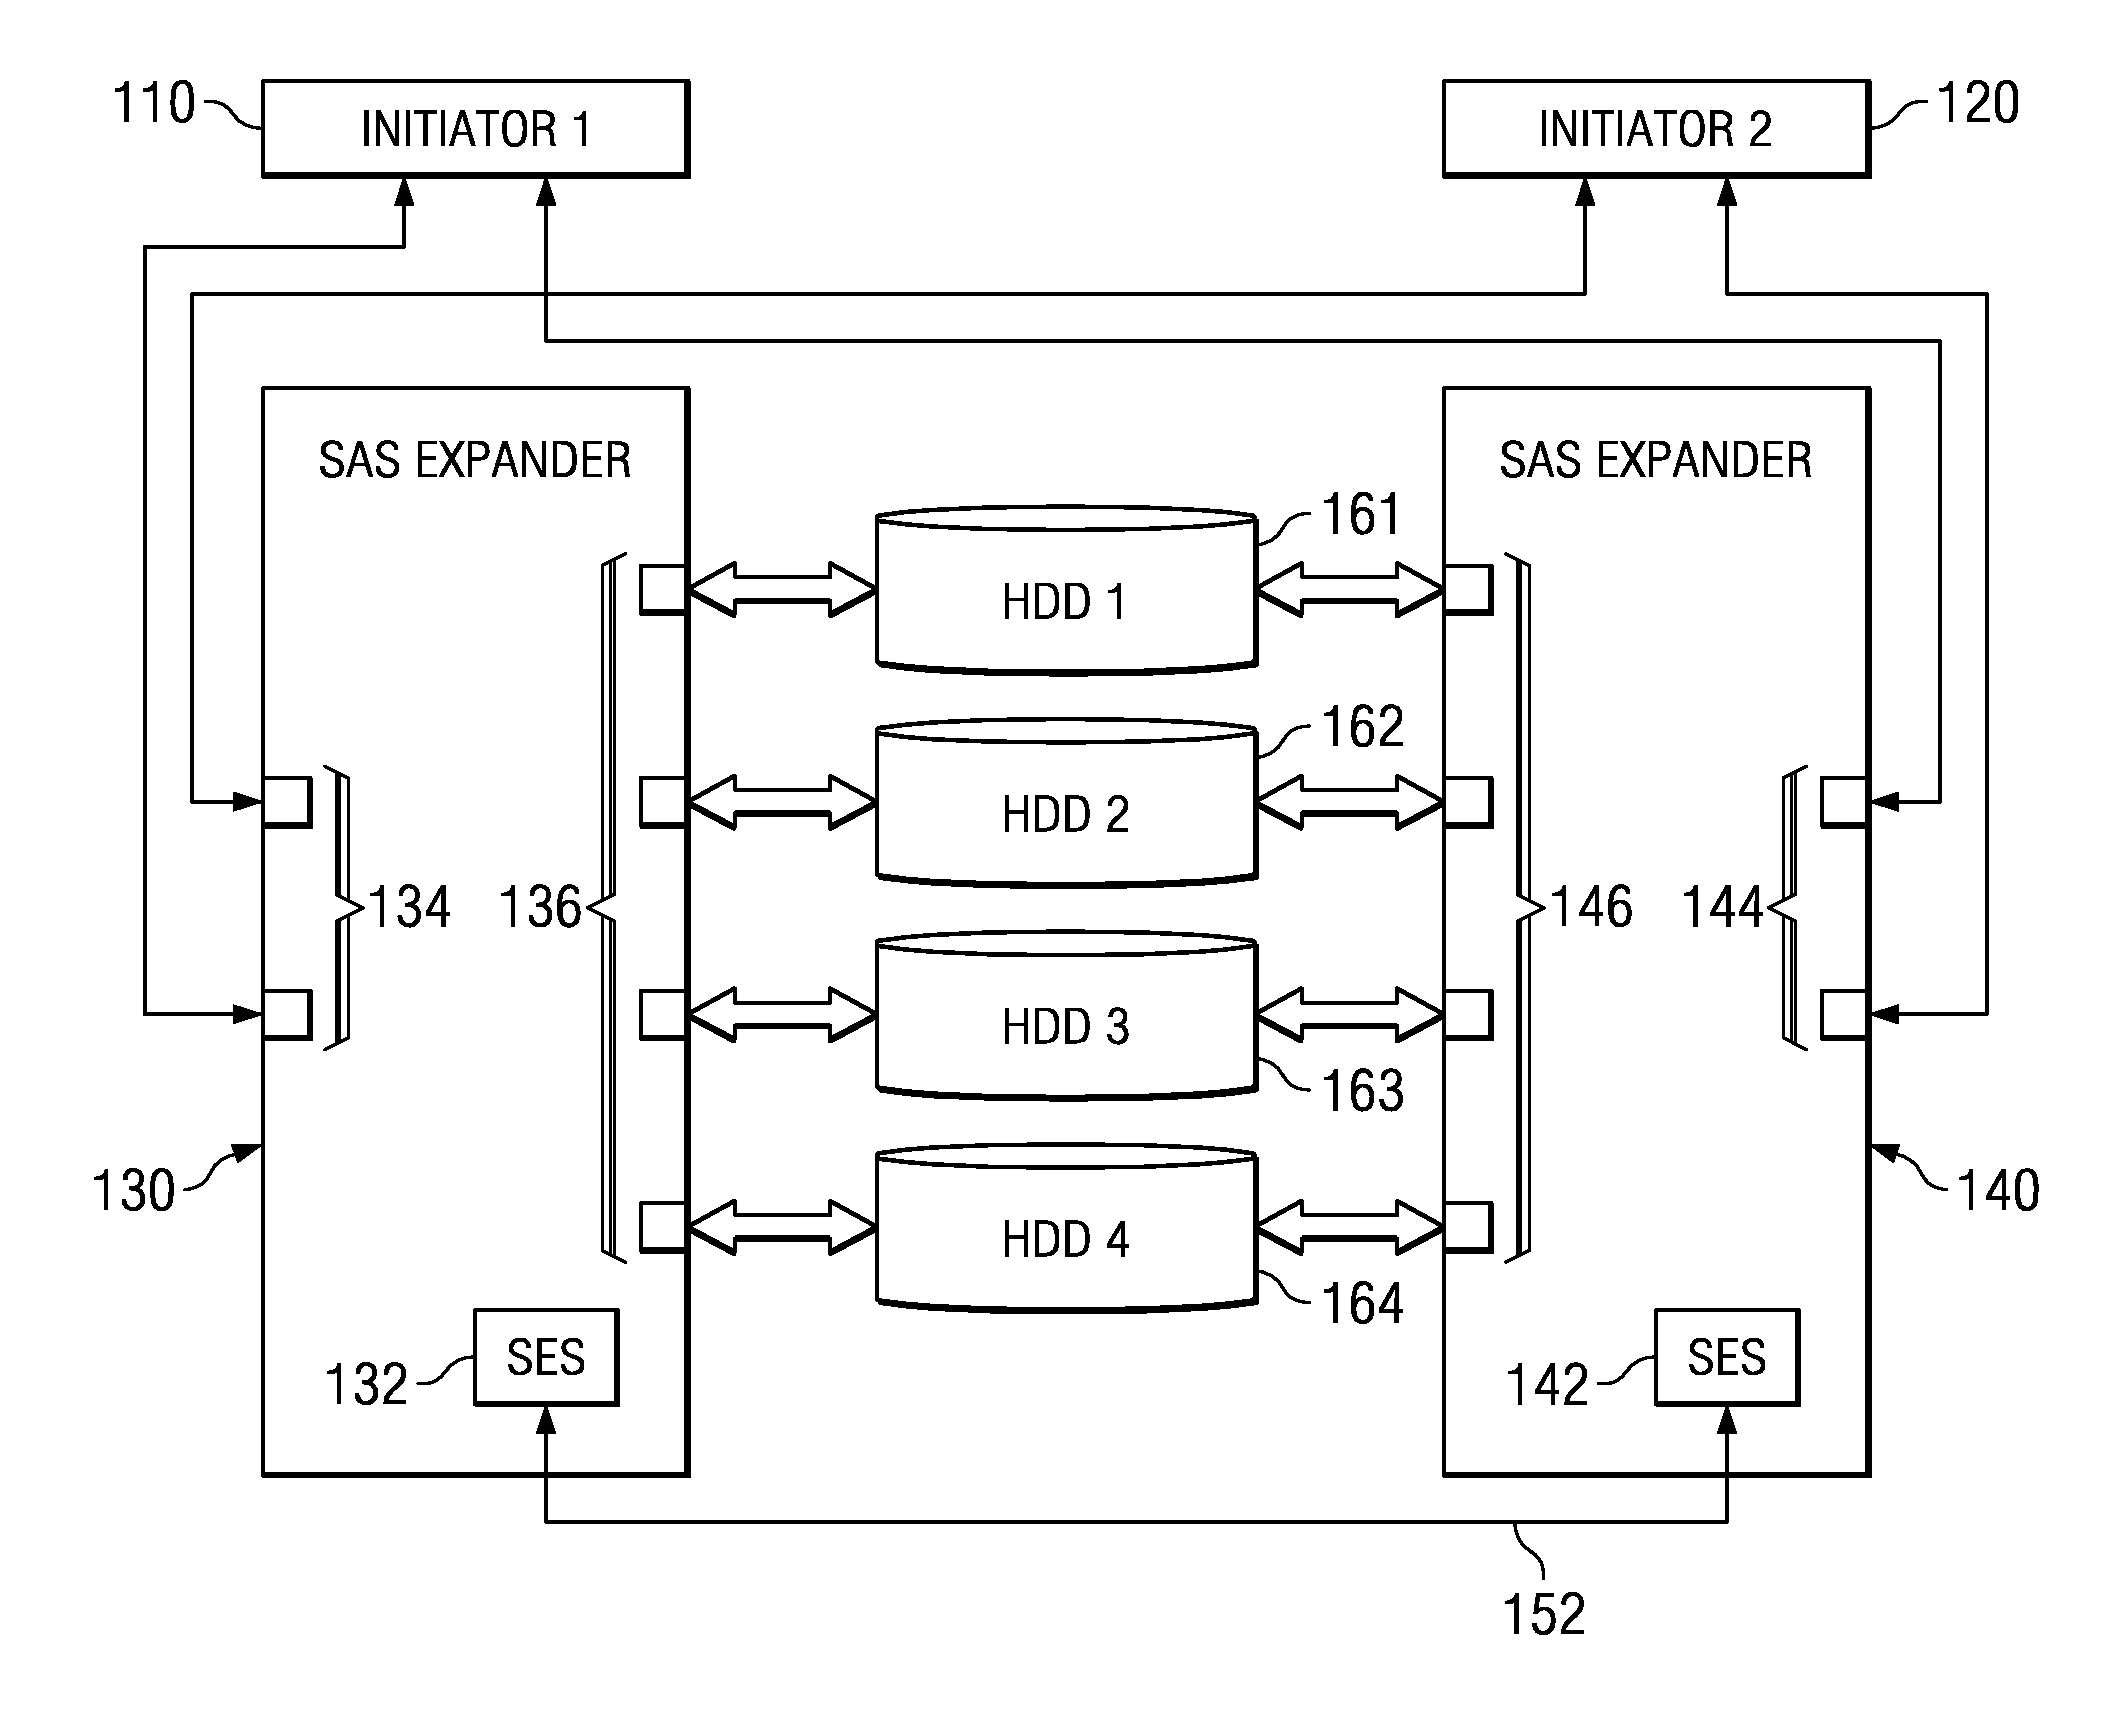 Intelligent Dynamic Multi-Zone Single Expander Connecting Dual Ported Drives